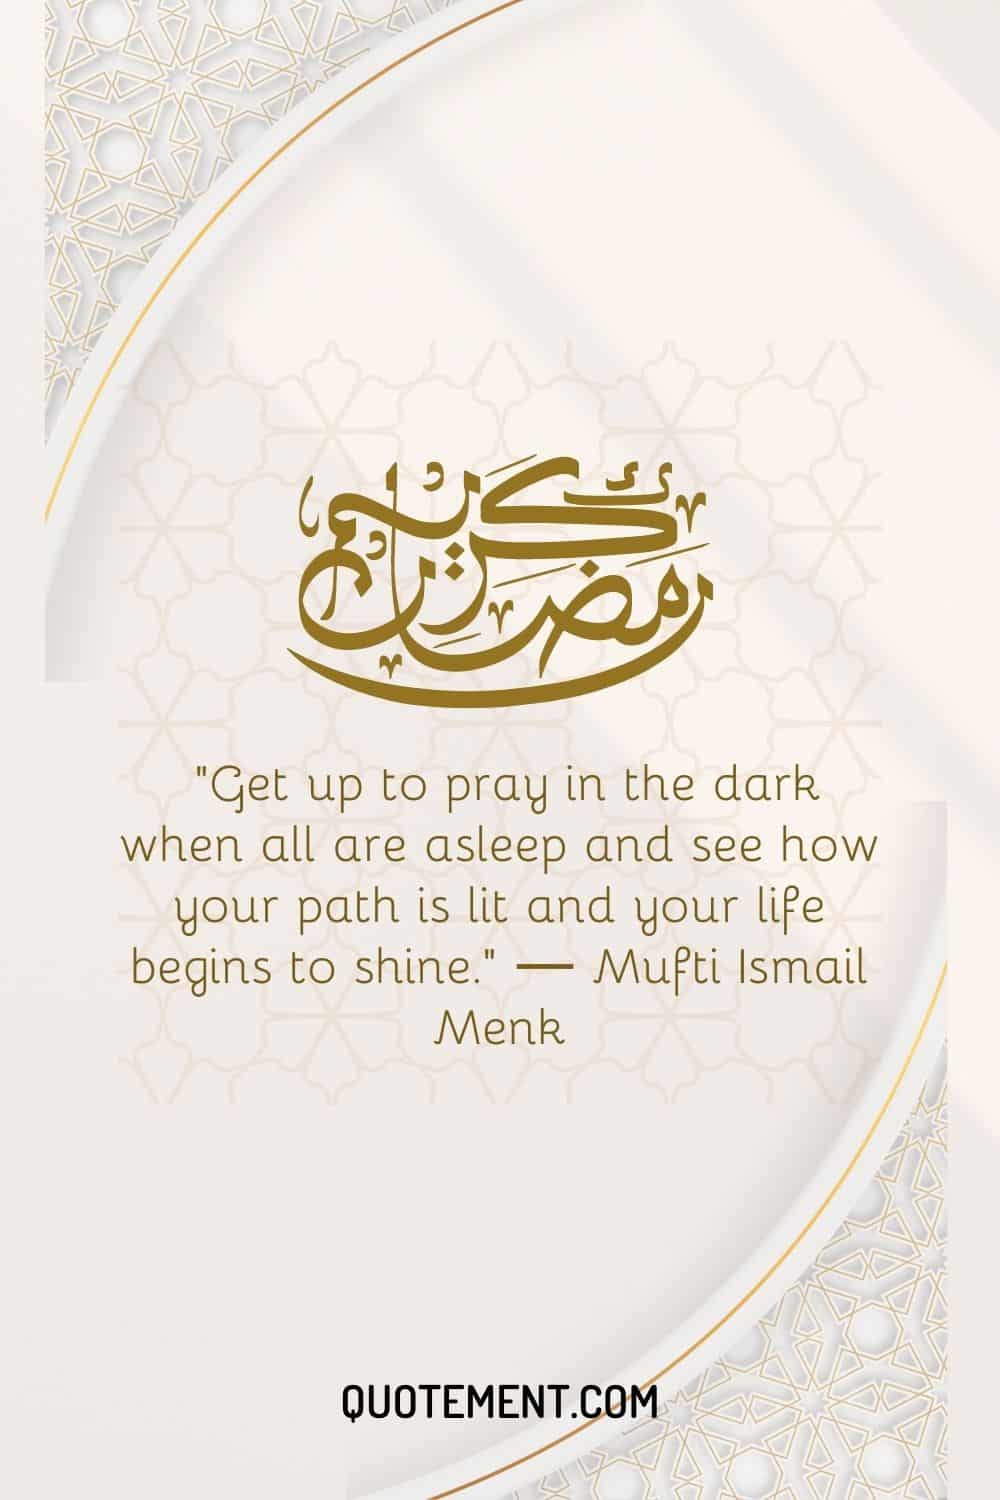 Get up to pray in the dark when all are asleep and see how your path is lit and your life begins to shine